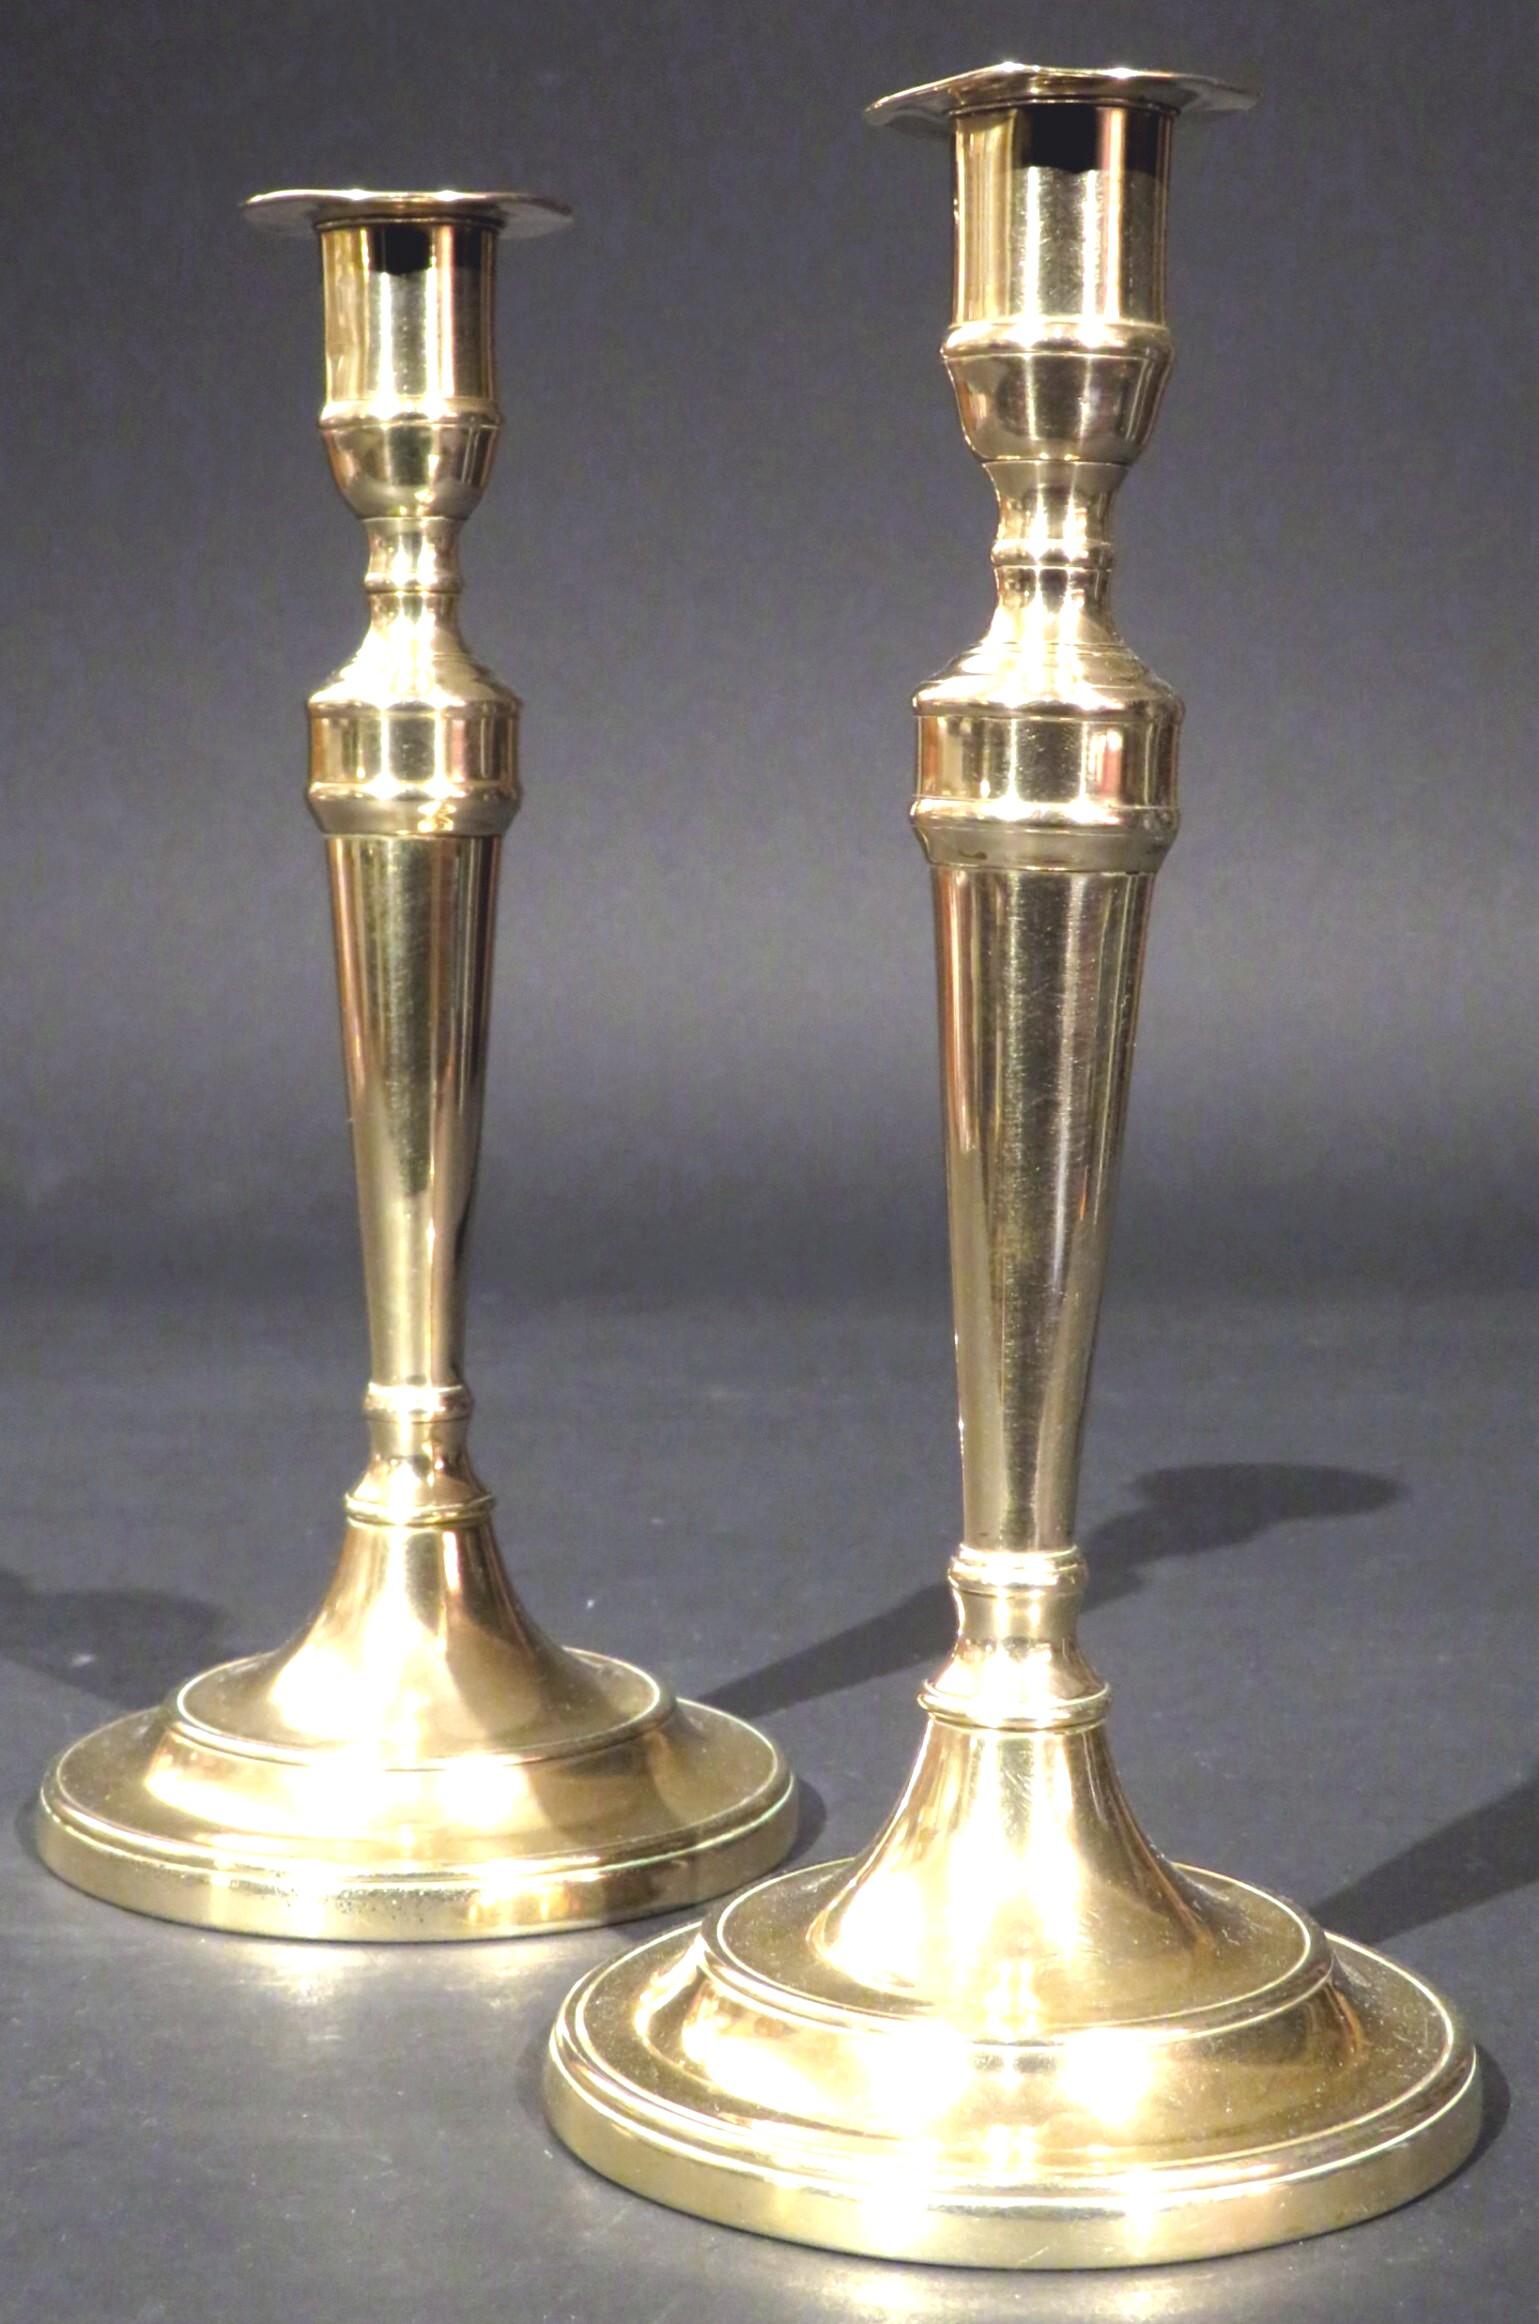 A very handsome and rare pair of mid 18th century bell-metal candlesticks, showing flaring seamed columns with cylindrical nozzles and flattened drip pans rising from stepped circular bases that retain their original & functioning push-rods. 
Both